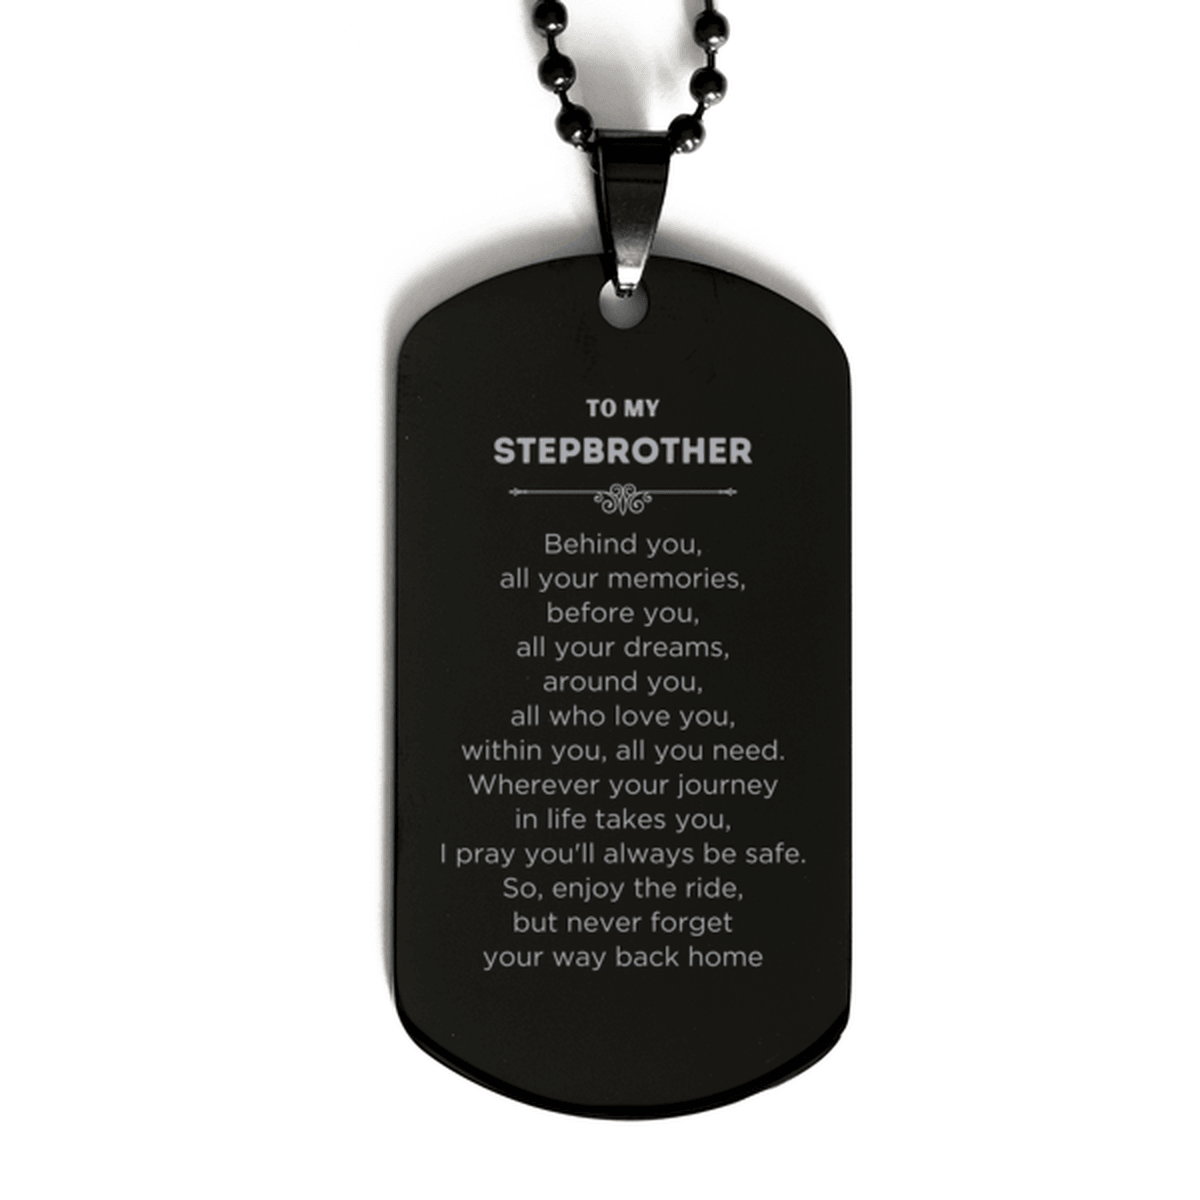 To My Stepbrother Gifts, Inspirational Stepbrother Black Dog Tag, Sentimental Birthday Christmas Unique Gifts For Stepbrother Behind you, all your memories, before you, all your dreams, around you, all who love you, within you, all you need - Mallard Moon Gift Shop